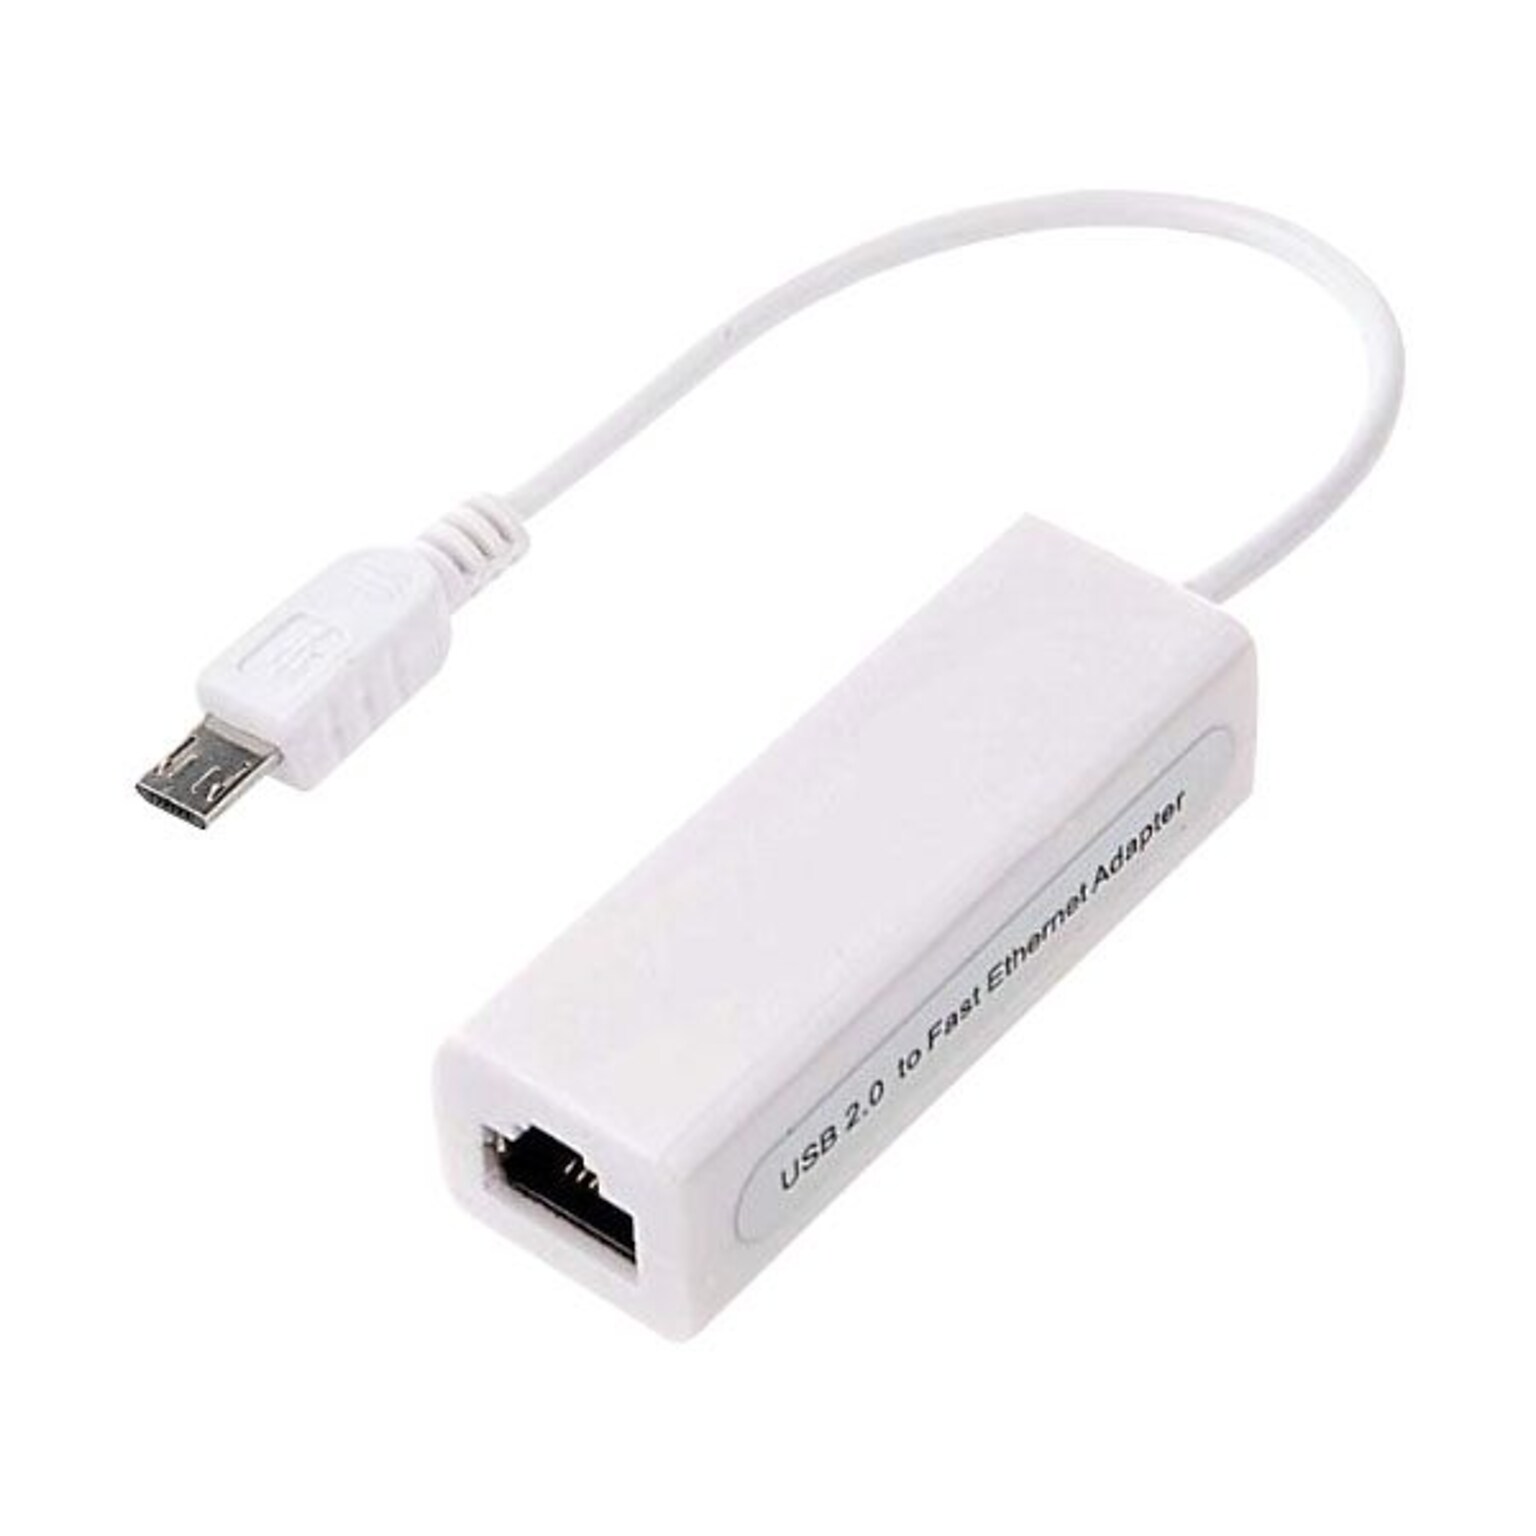 4XEM™ 4XMICROUSBENET Micro USB to 10/100 Mbps Ethernet Adapter